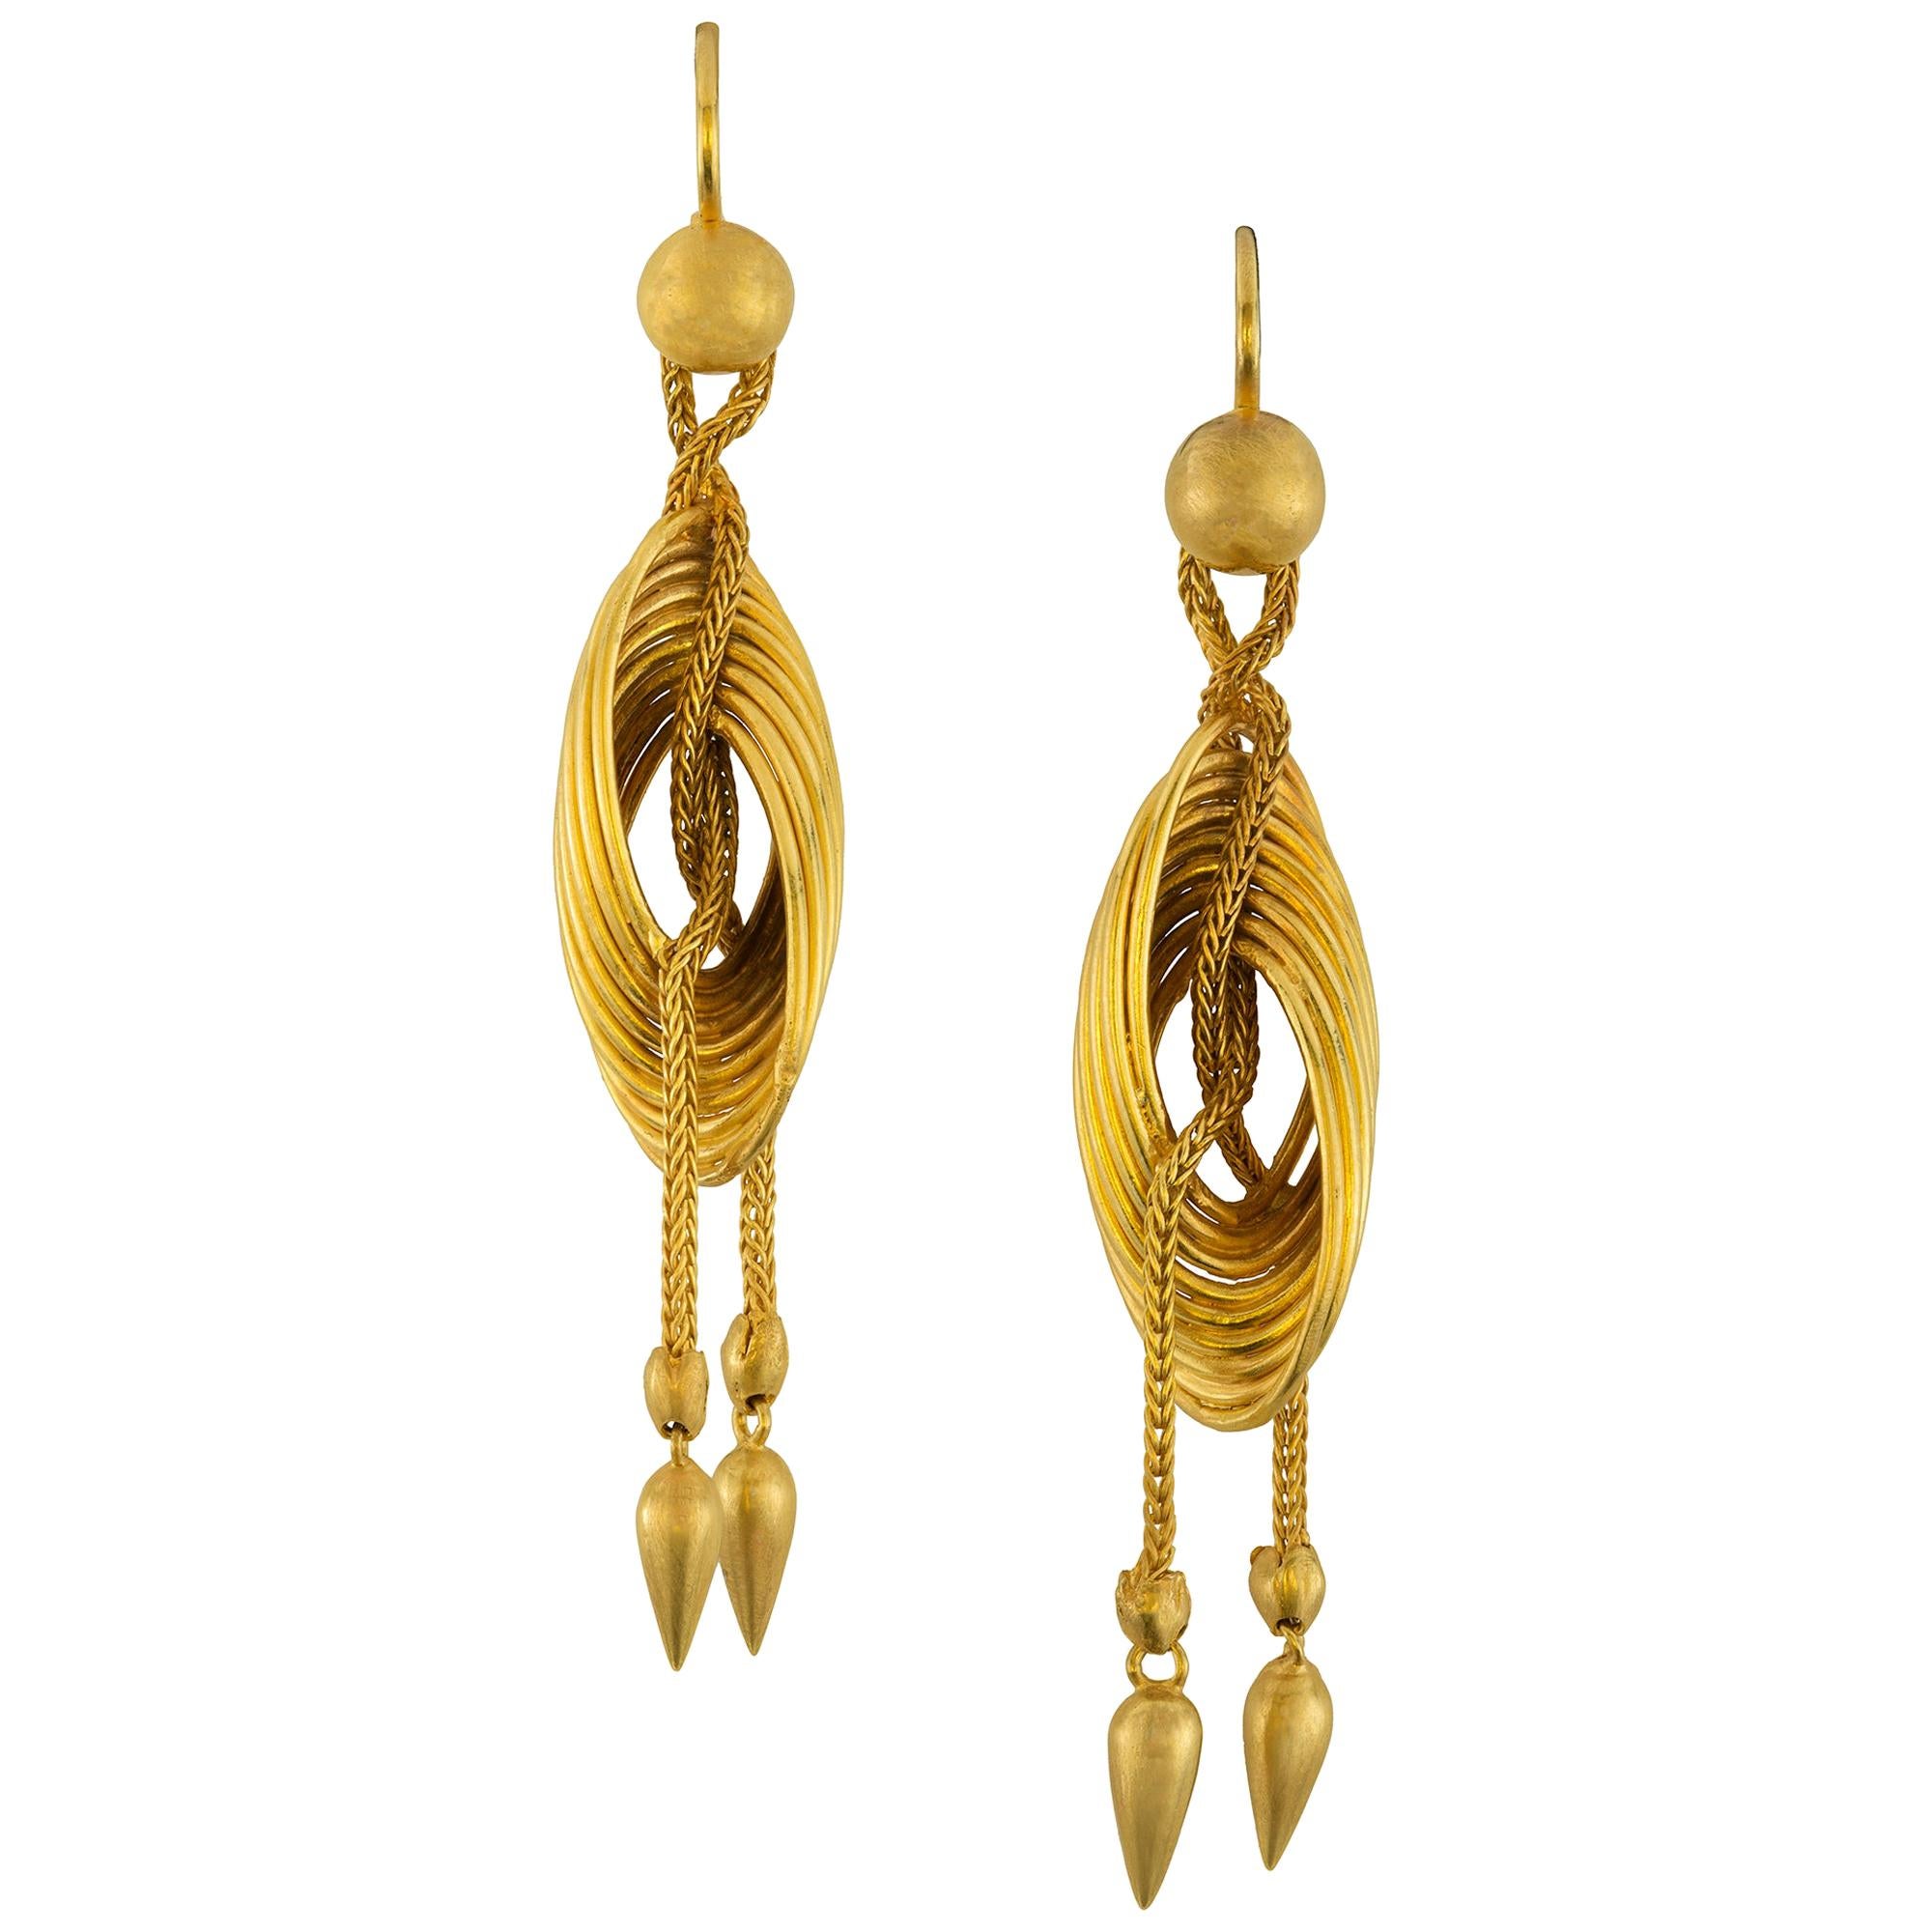 Pair of Late 19th Century Gold Drop Earrings